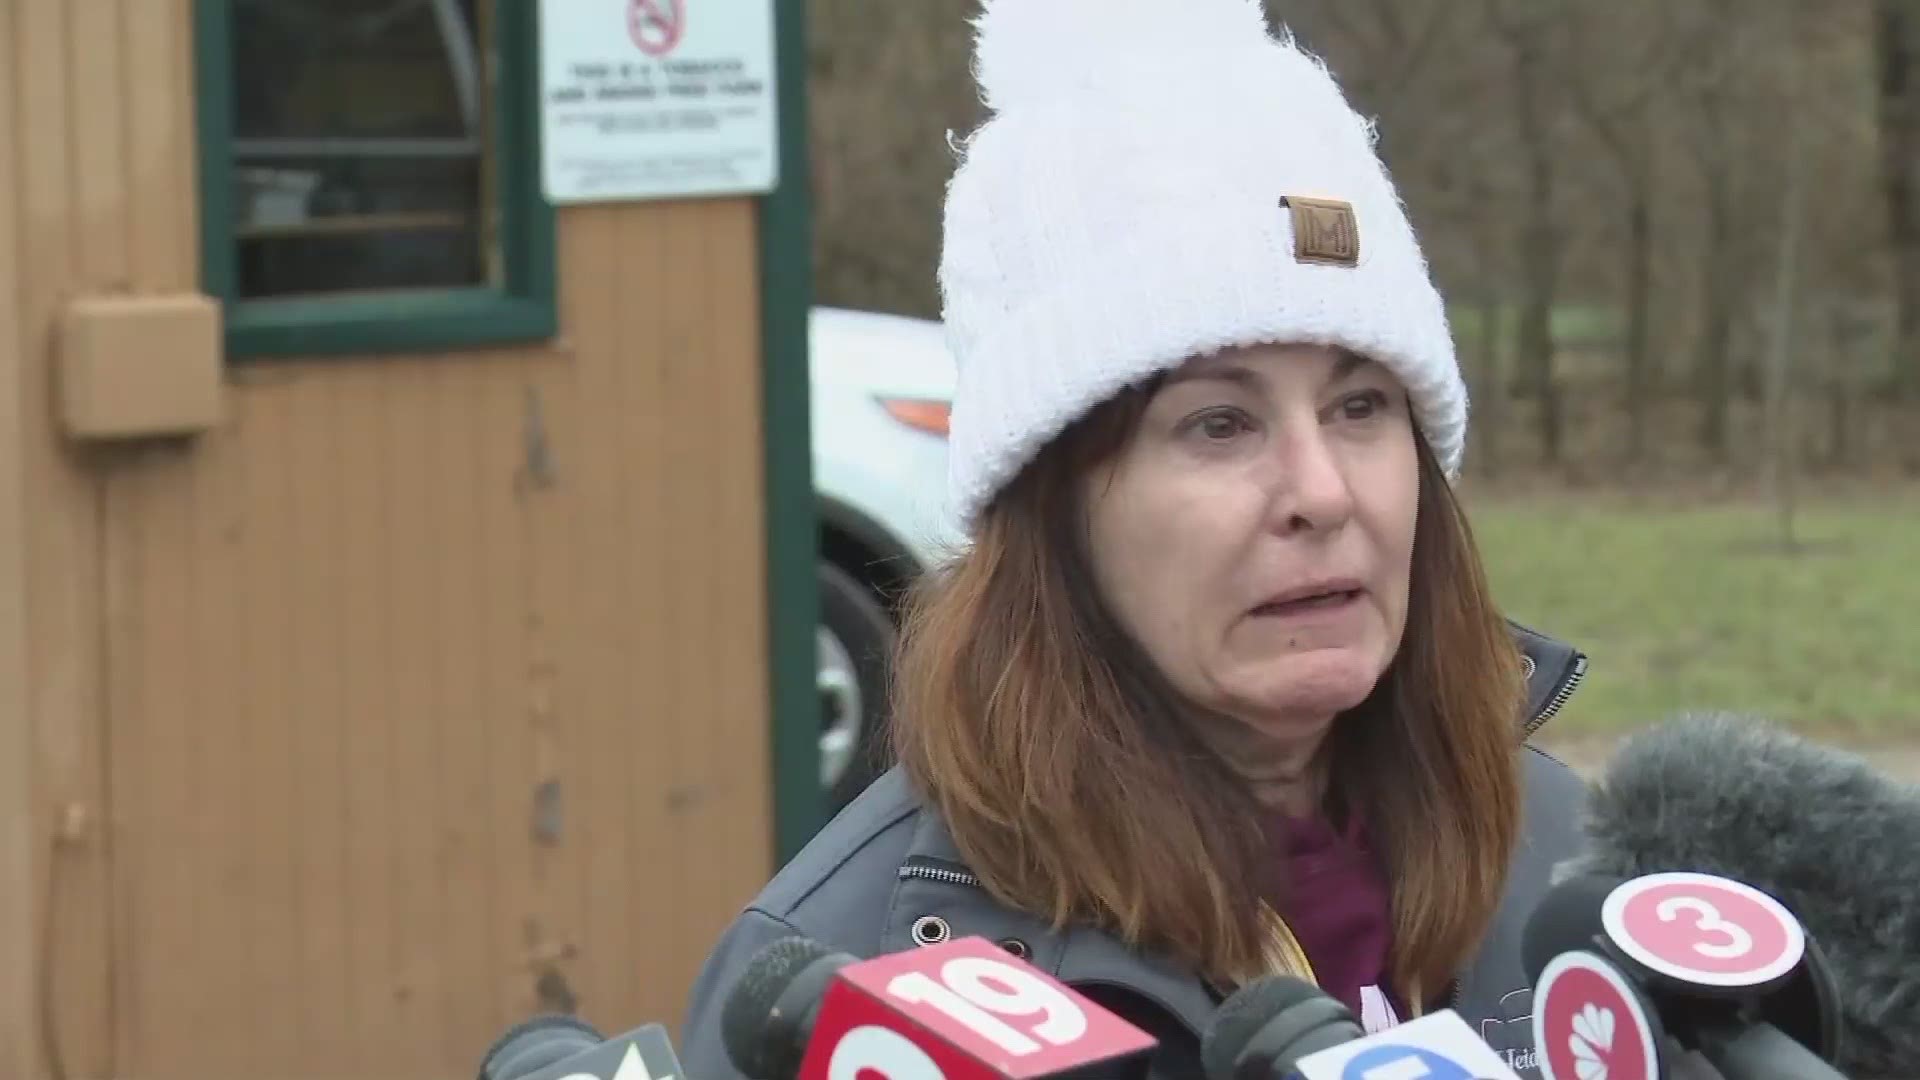 Nov. 29, 2019: Holly Hunt, one of the co-owners of the African Safari Wildlife Park in Port Clinton, offered an update on the investigation Friday afternoon.